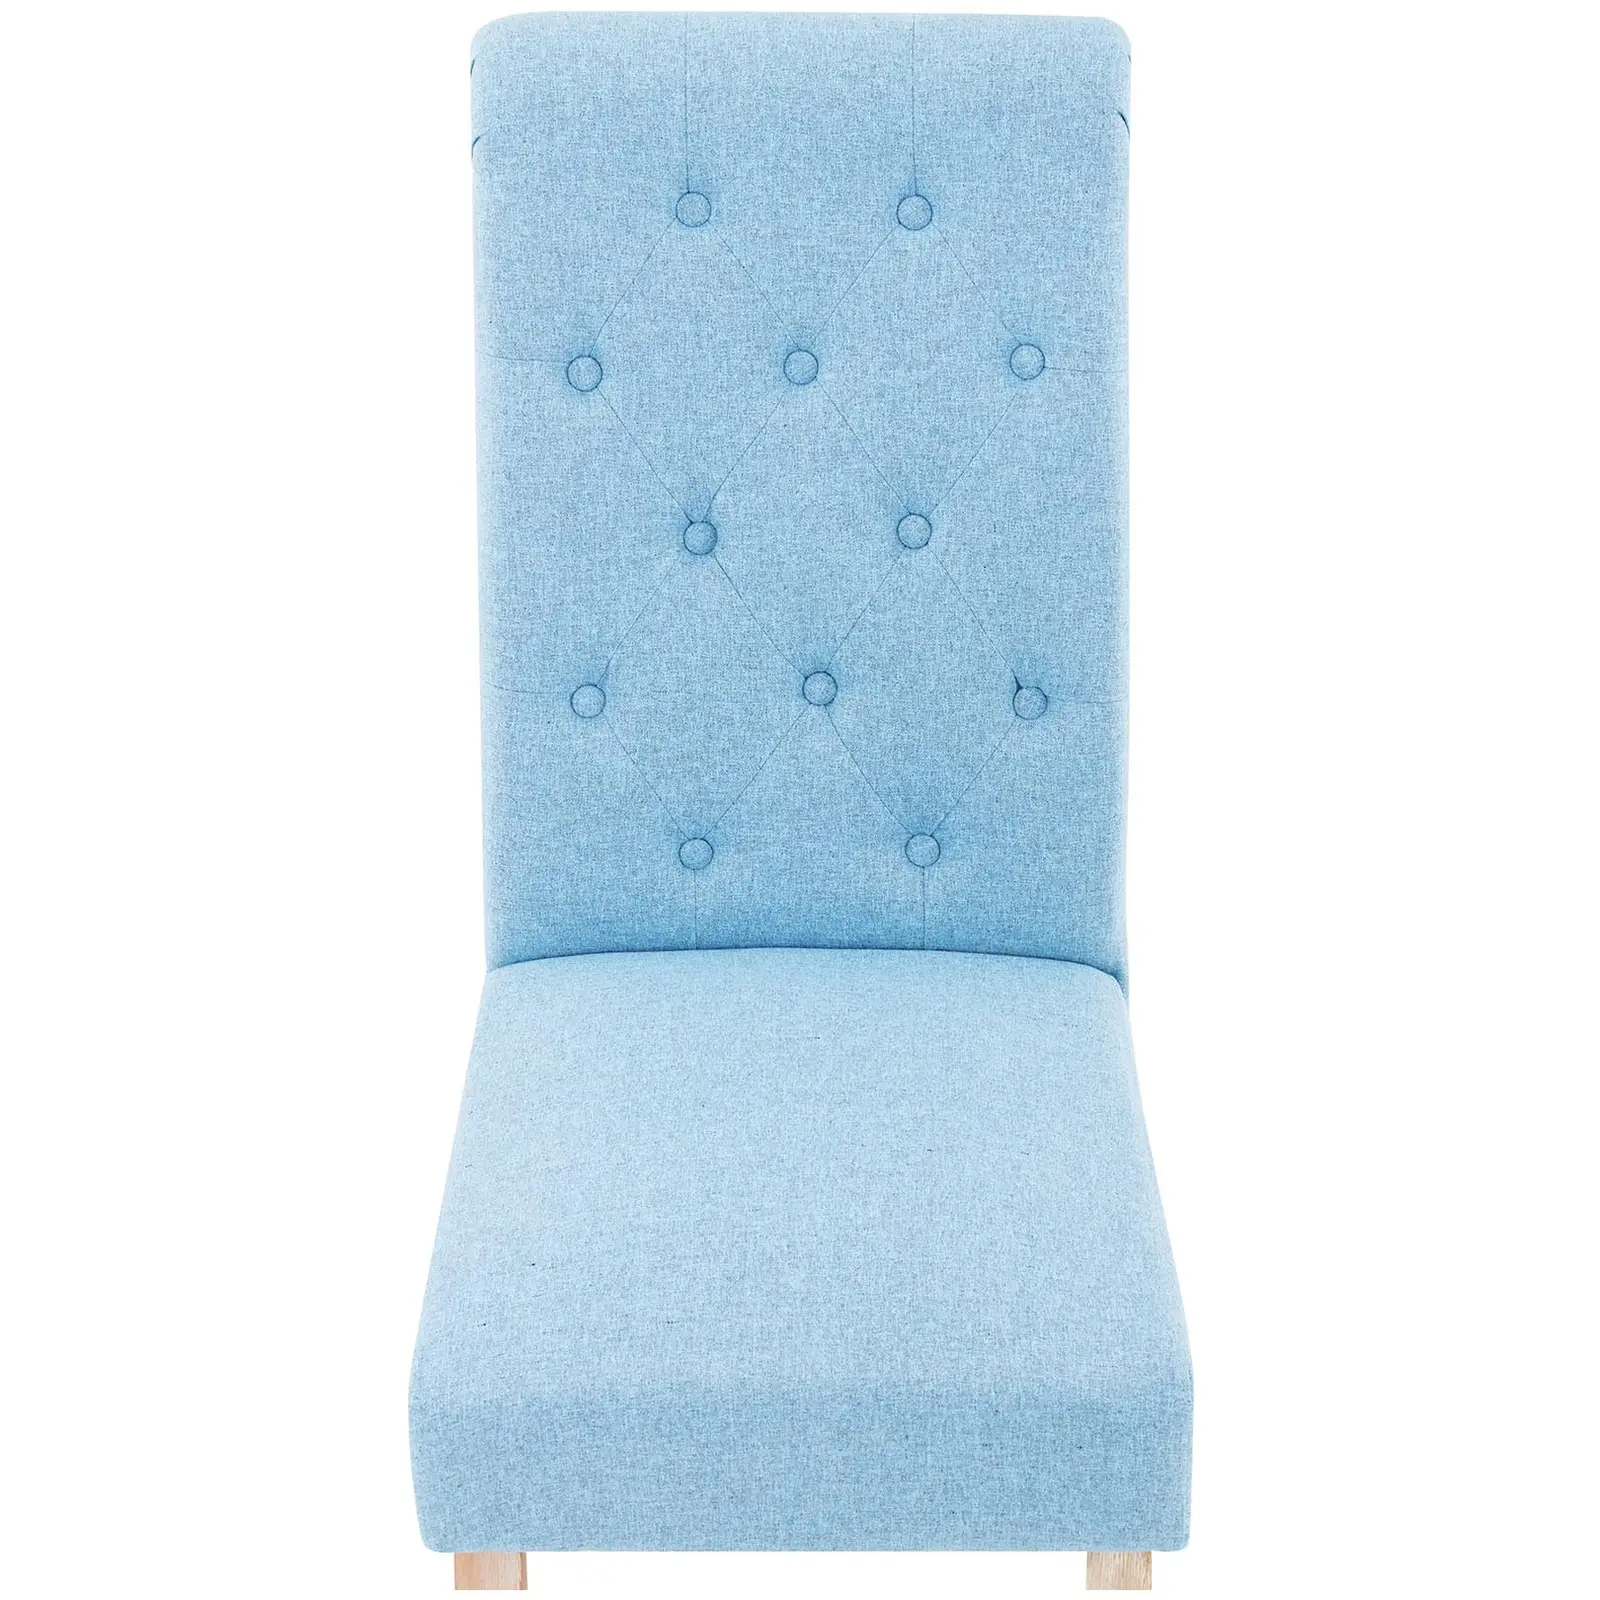 Upholstered Chair - set of 2 - up to 180 kg - seat 46 x 42 cm - sky blue